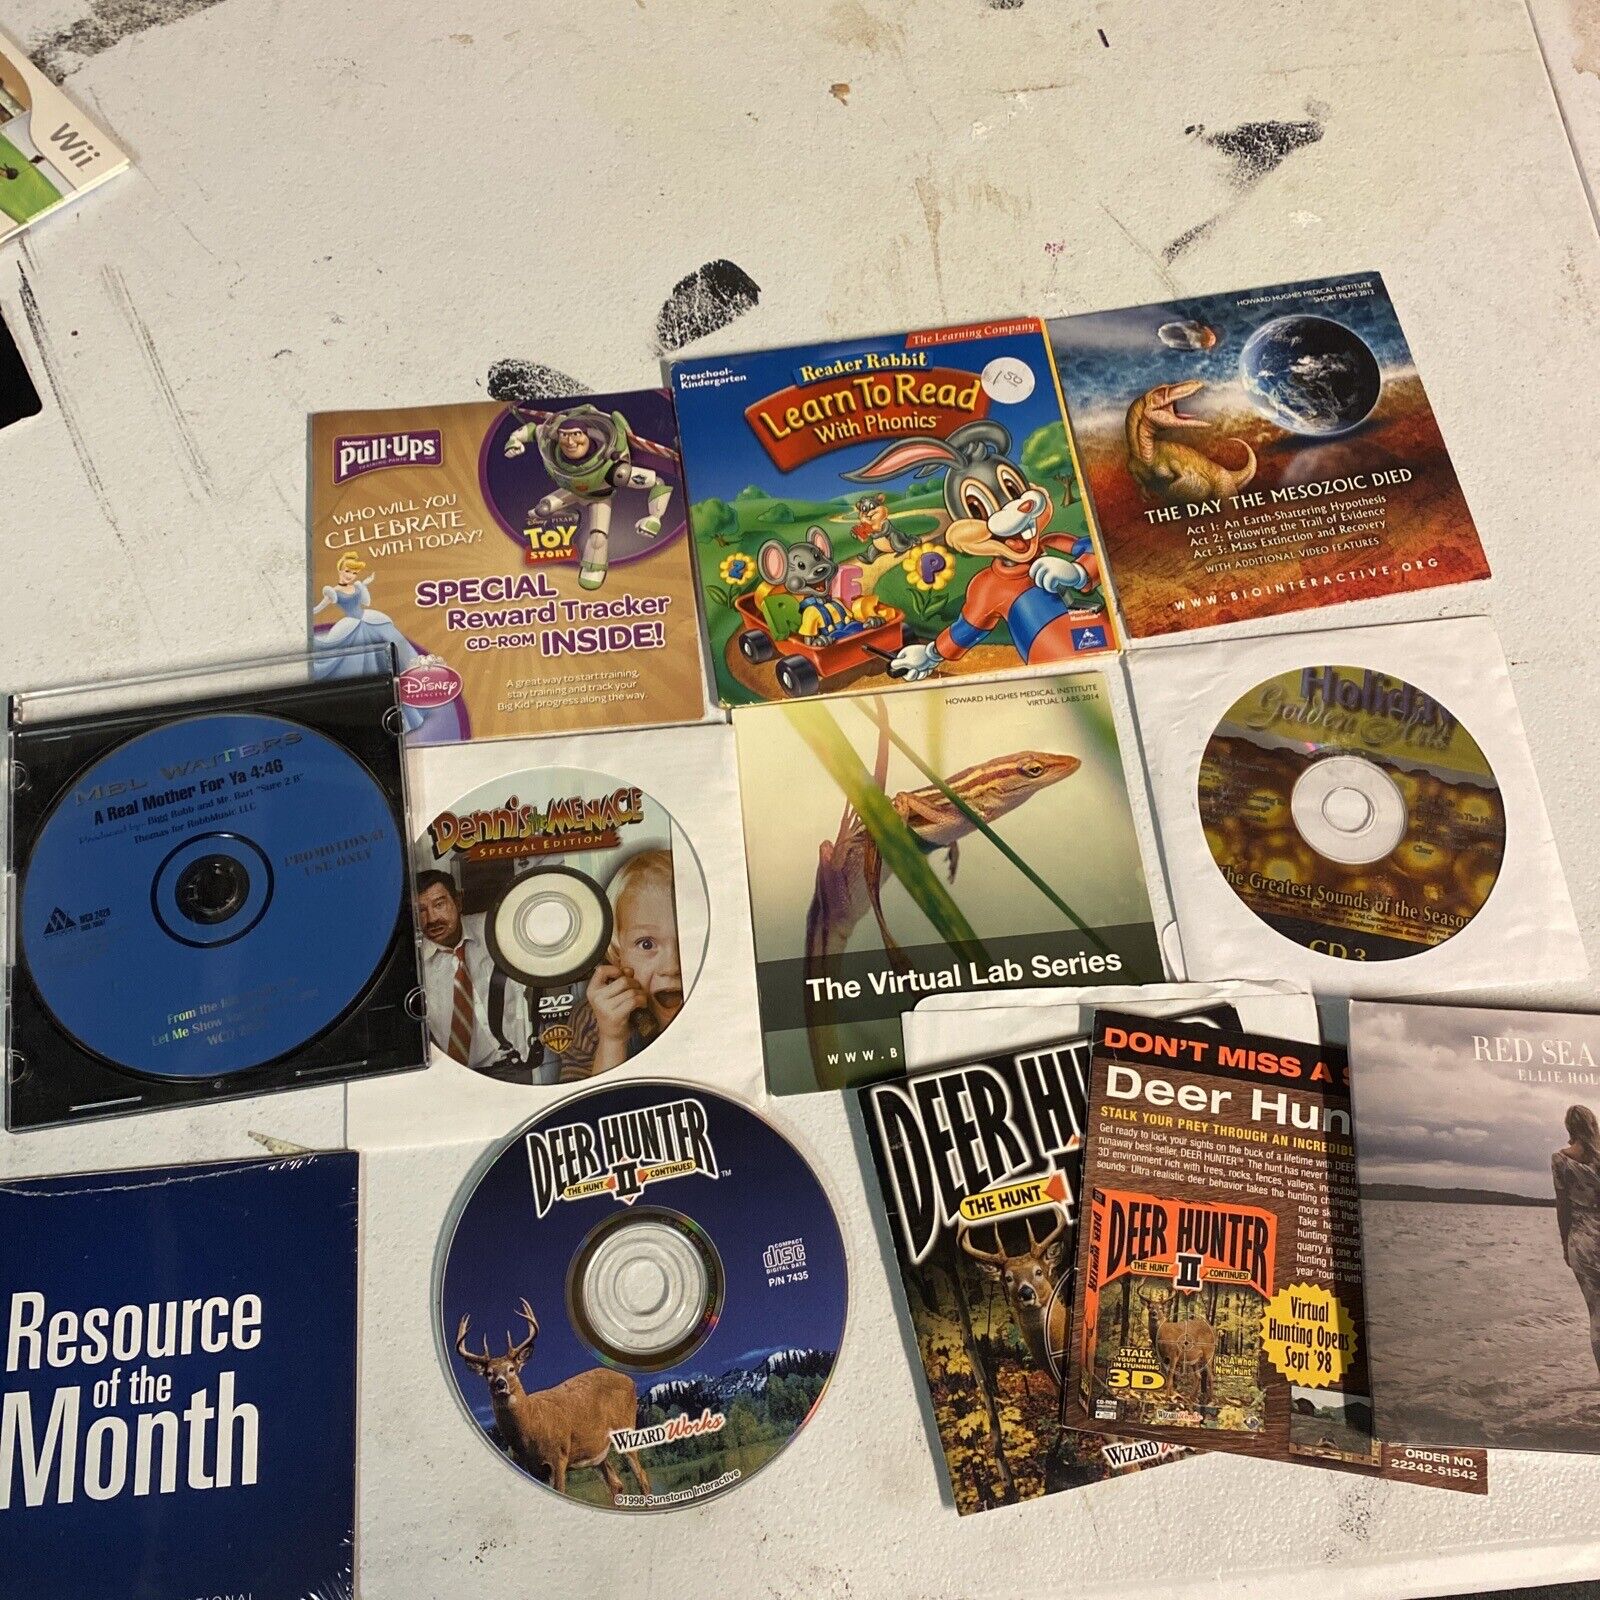 Reader Rabbit Learn to Read with Phonics - Windows 98 Deer hunter Plus Wow Lot